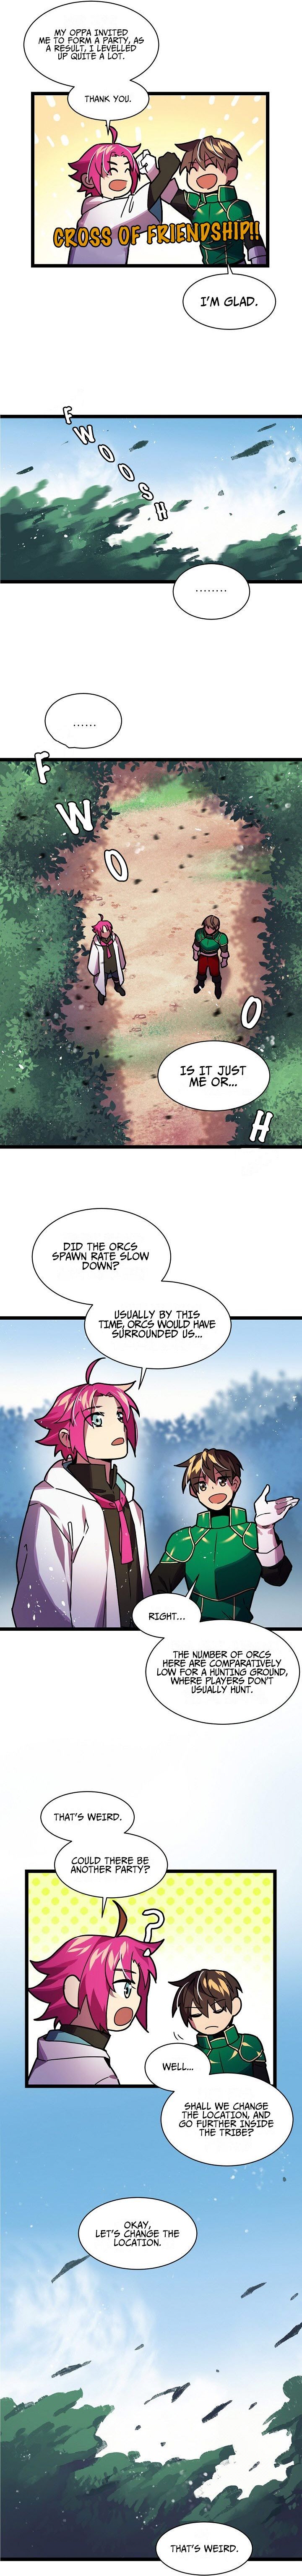 Ranker's Return Chapter 21 page 9